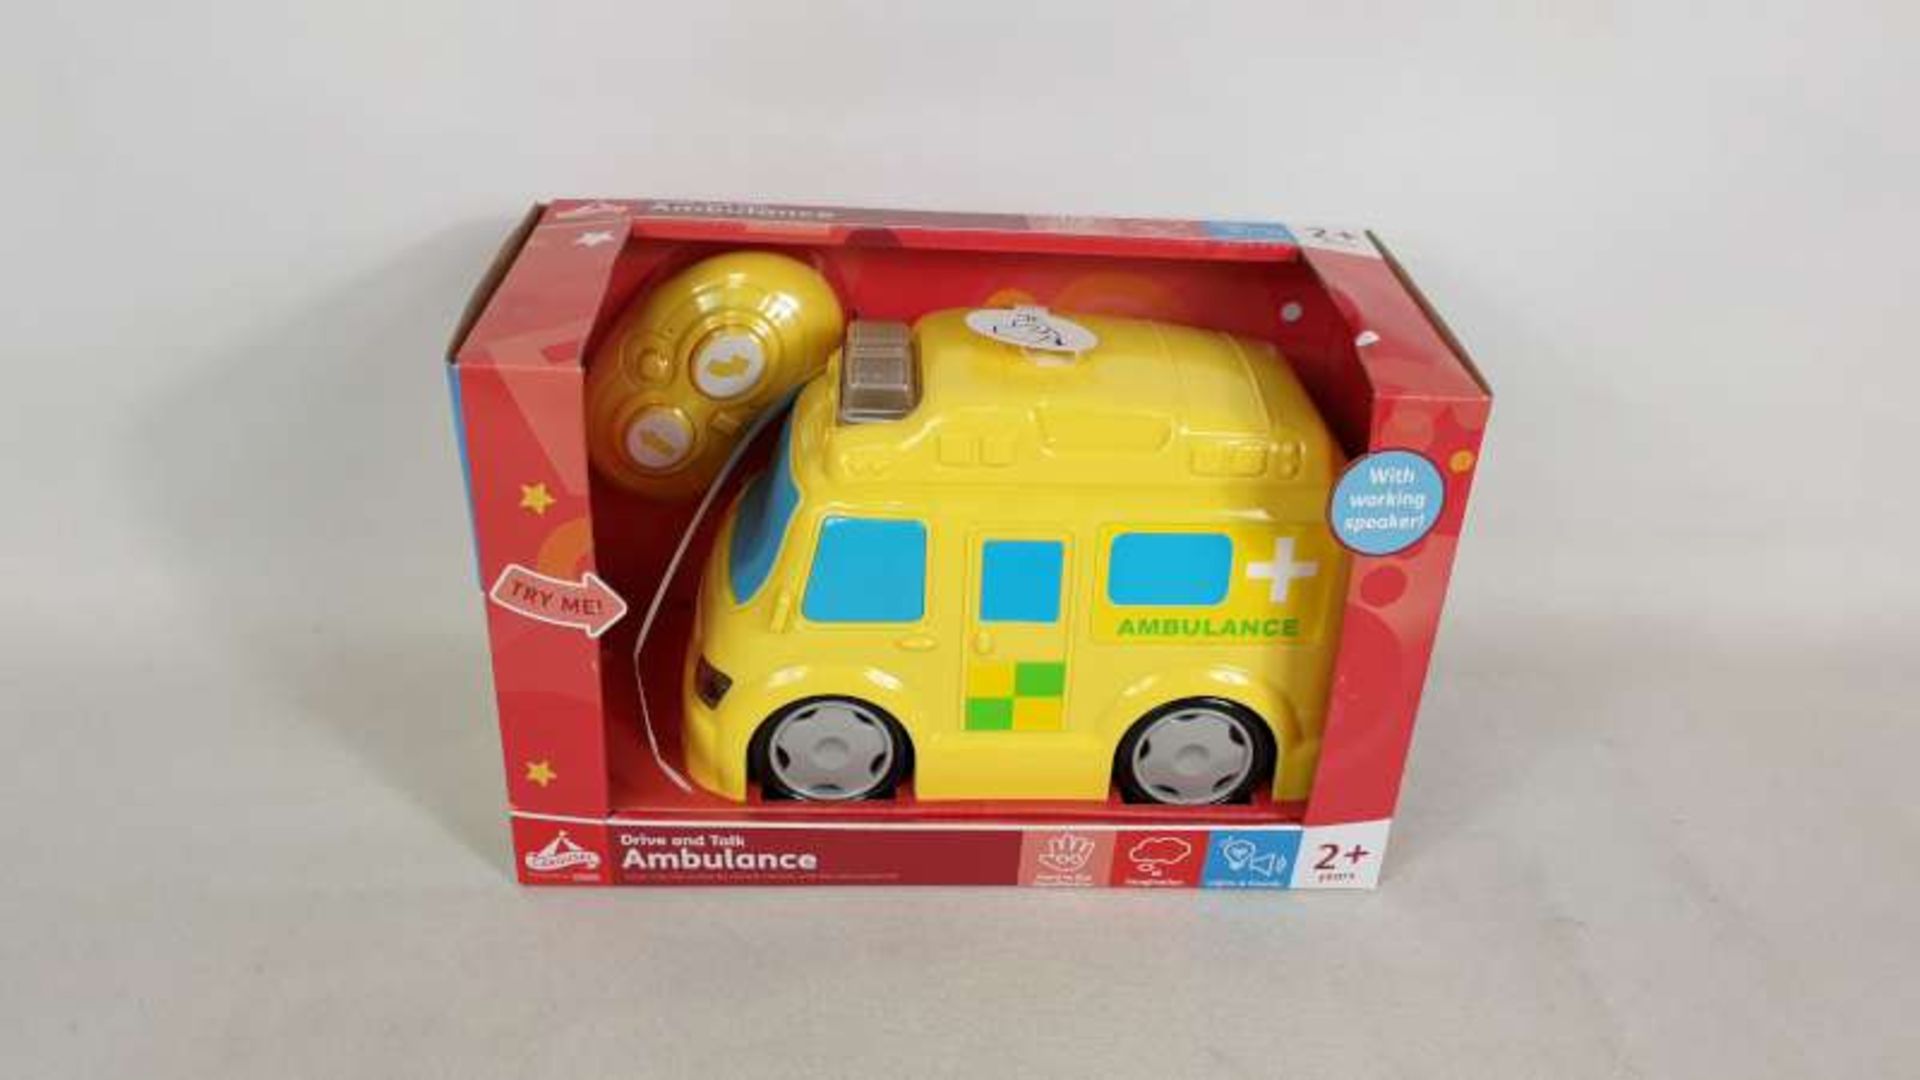 21 X BRAND NEW BOXED COROUSEL VOICE PROJECTOR AMBULANCE IN 7 BOXES